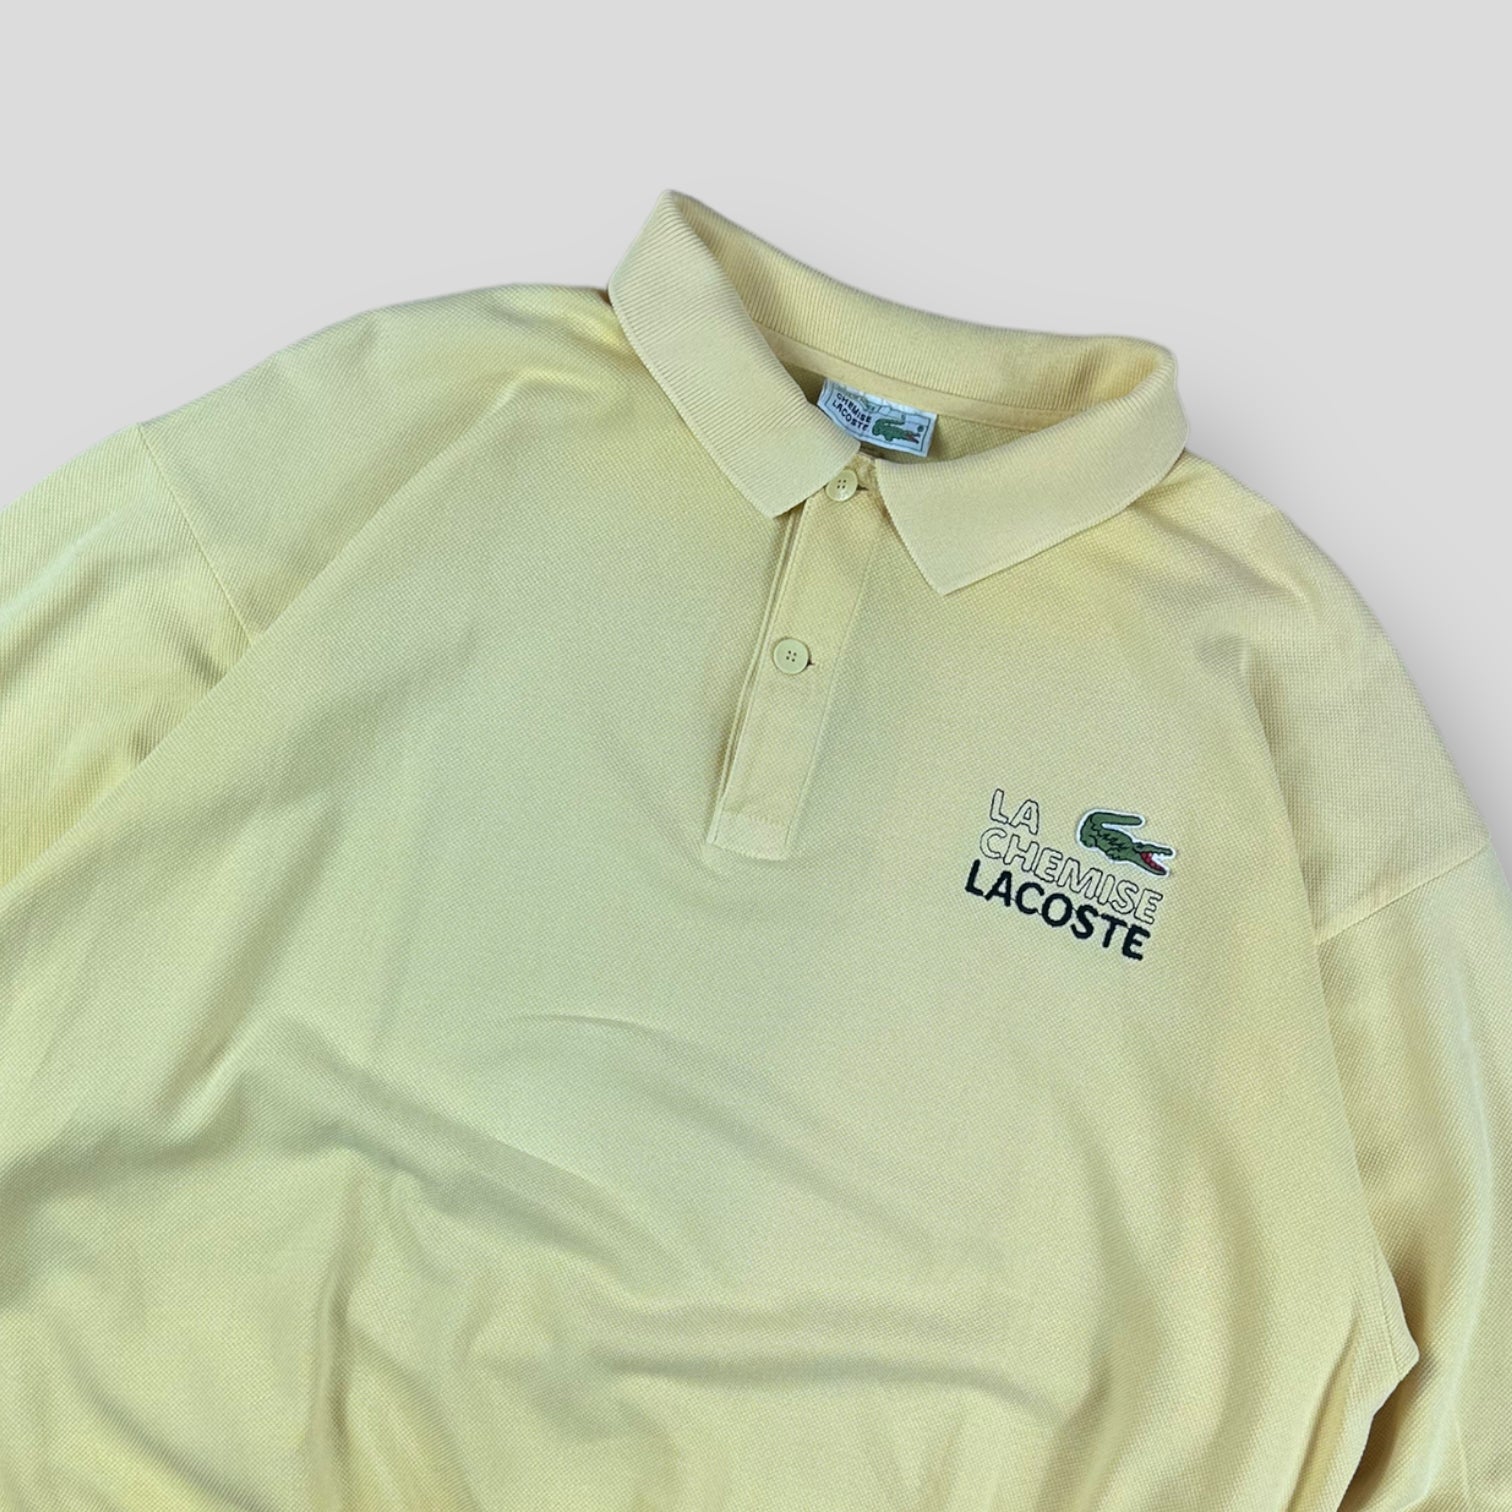 Lacoste polo sweater